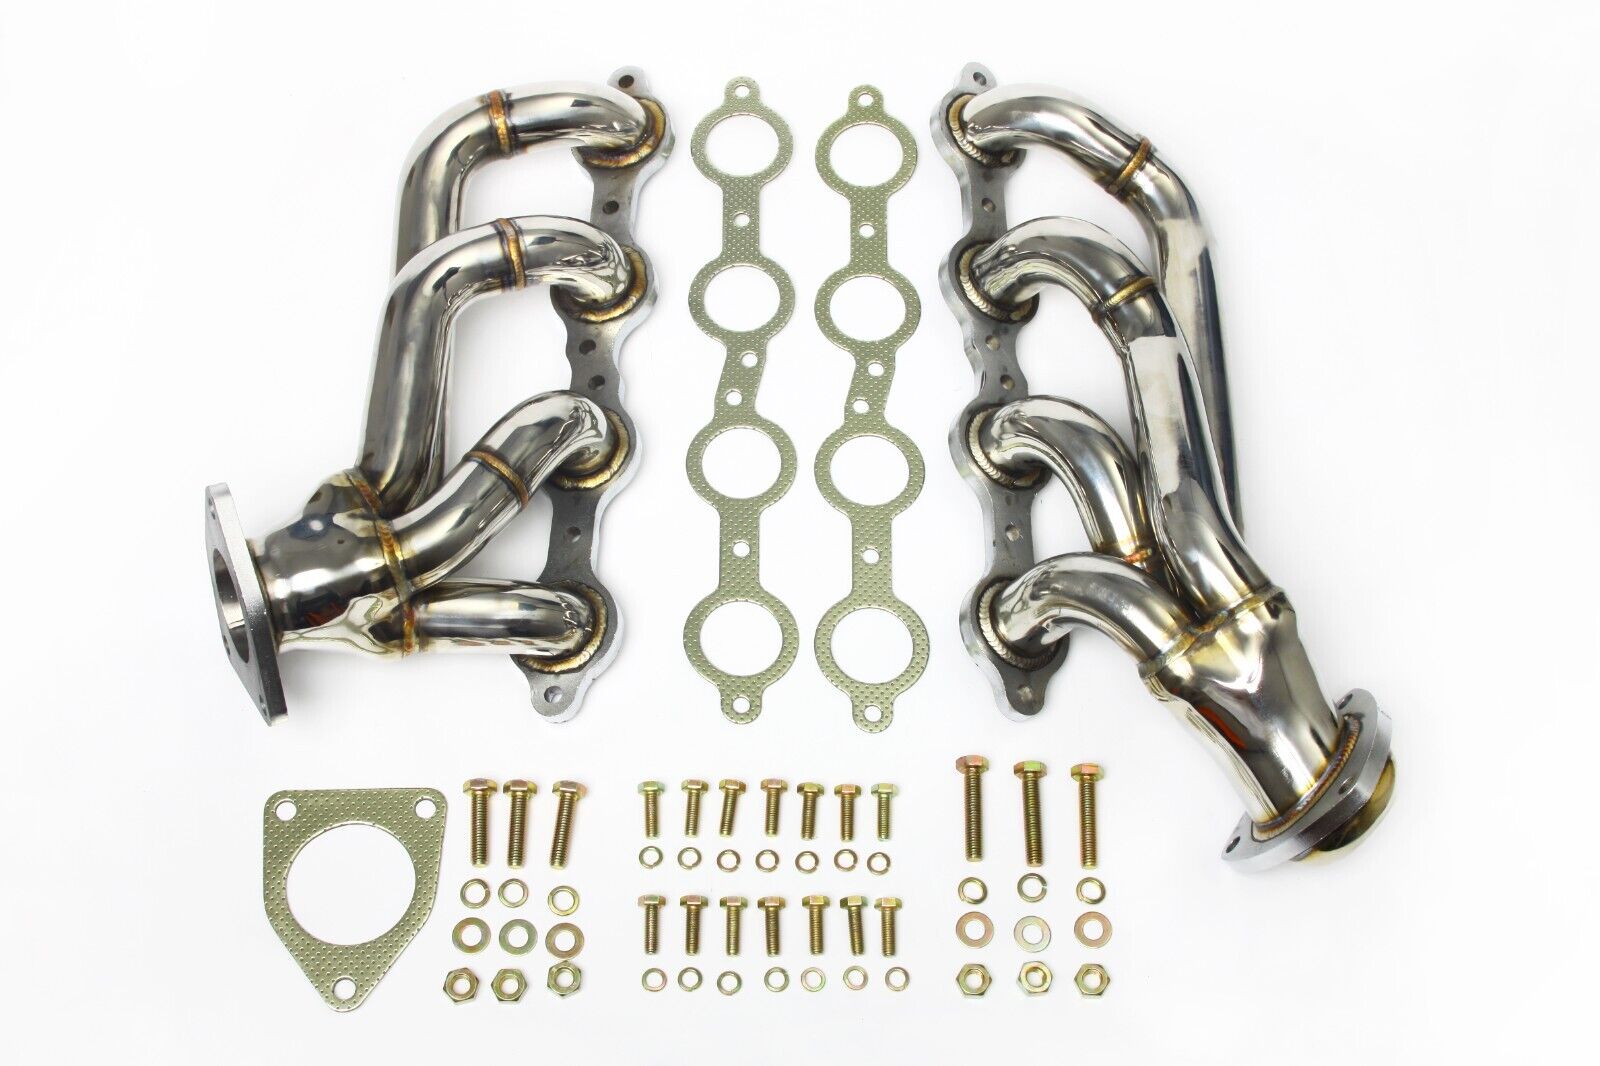 Exhaust Shorty  Headers 2002-2013 for Chevy/GMC 1500 Trucks V8 4.8L/5.3L